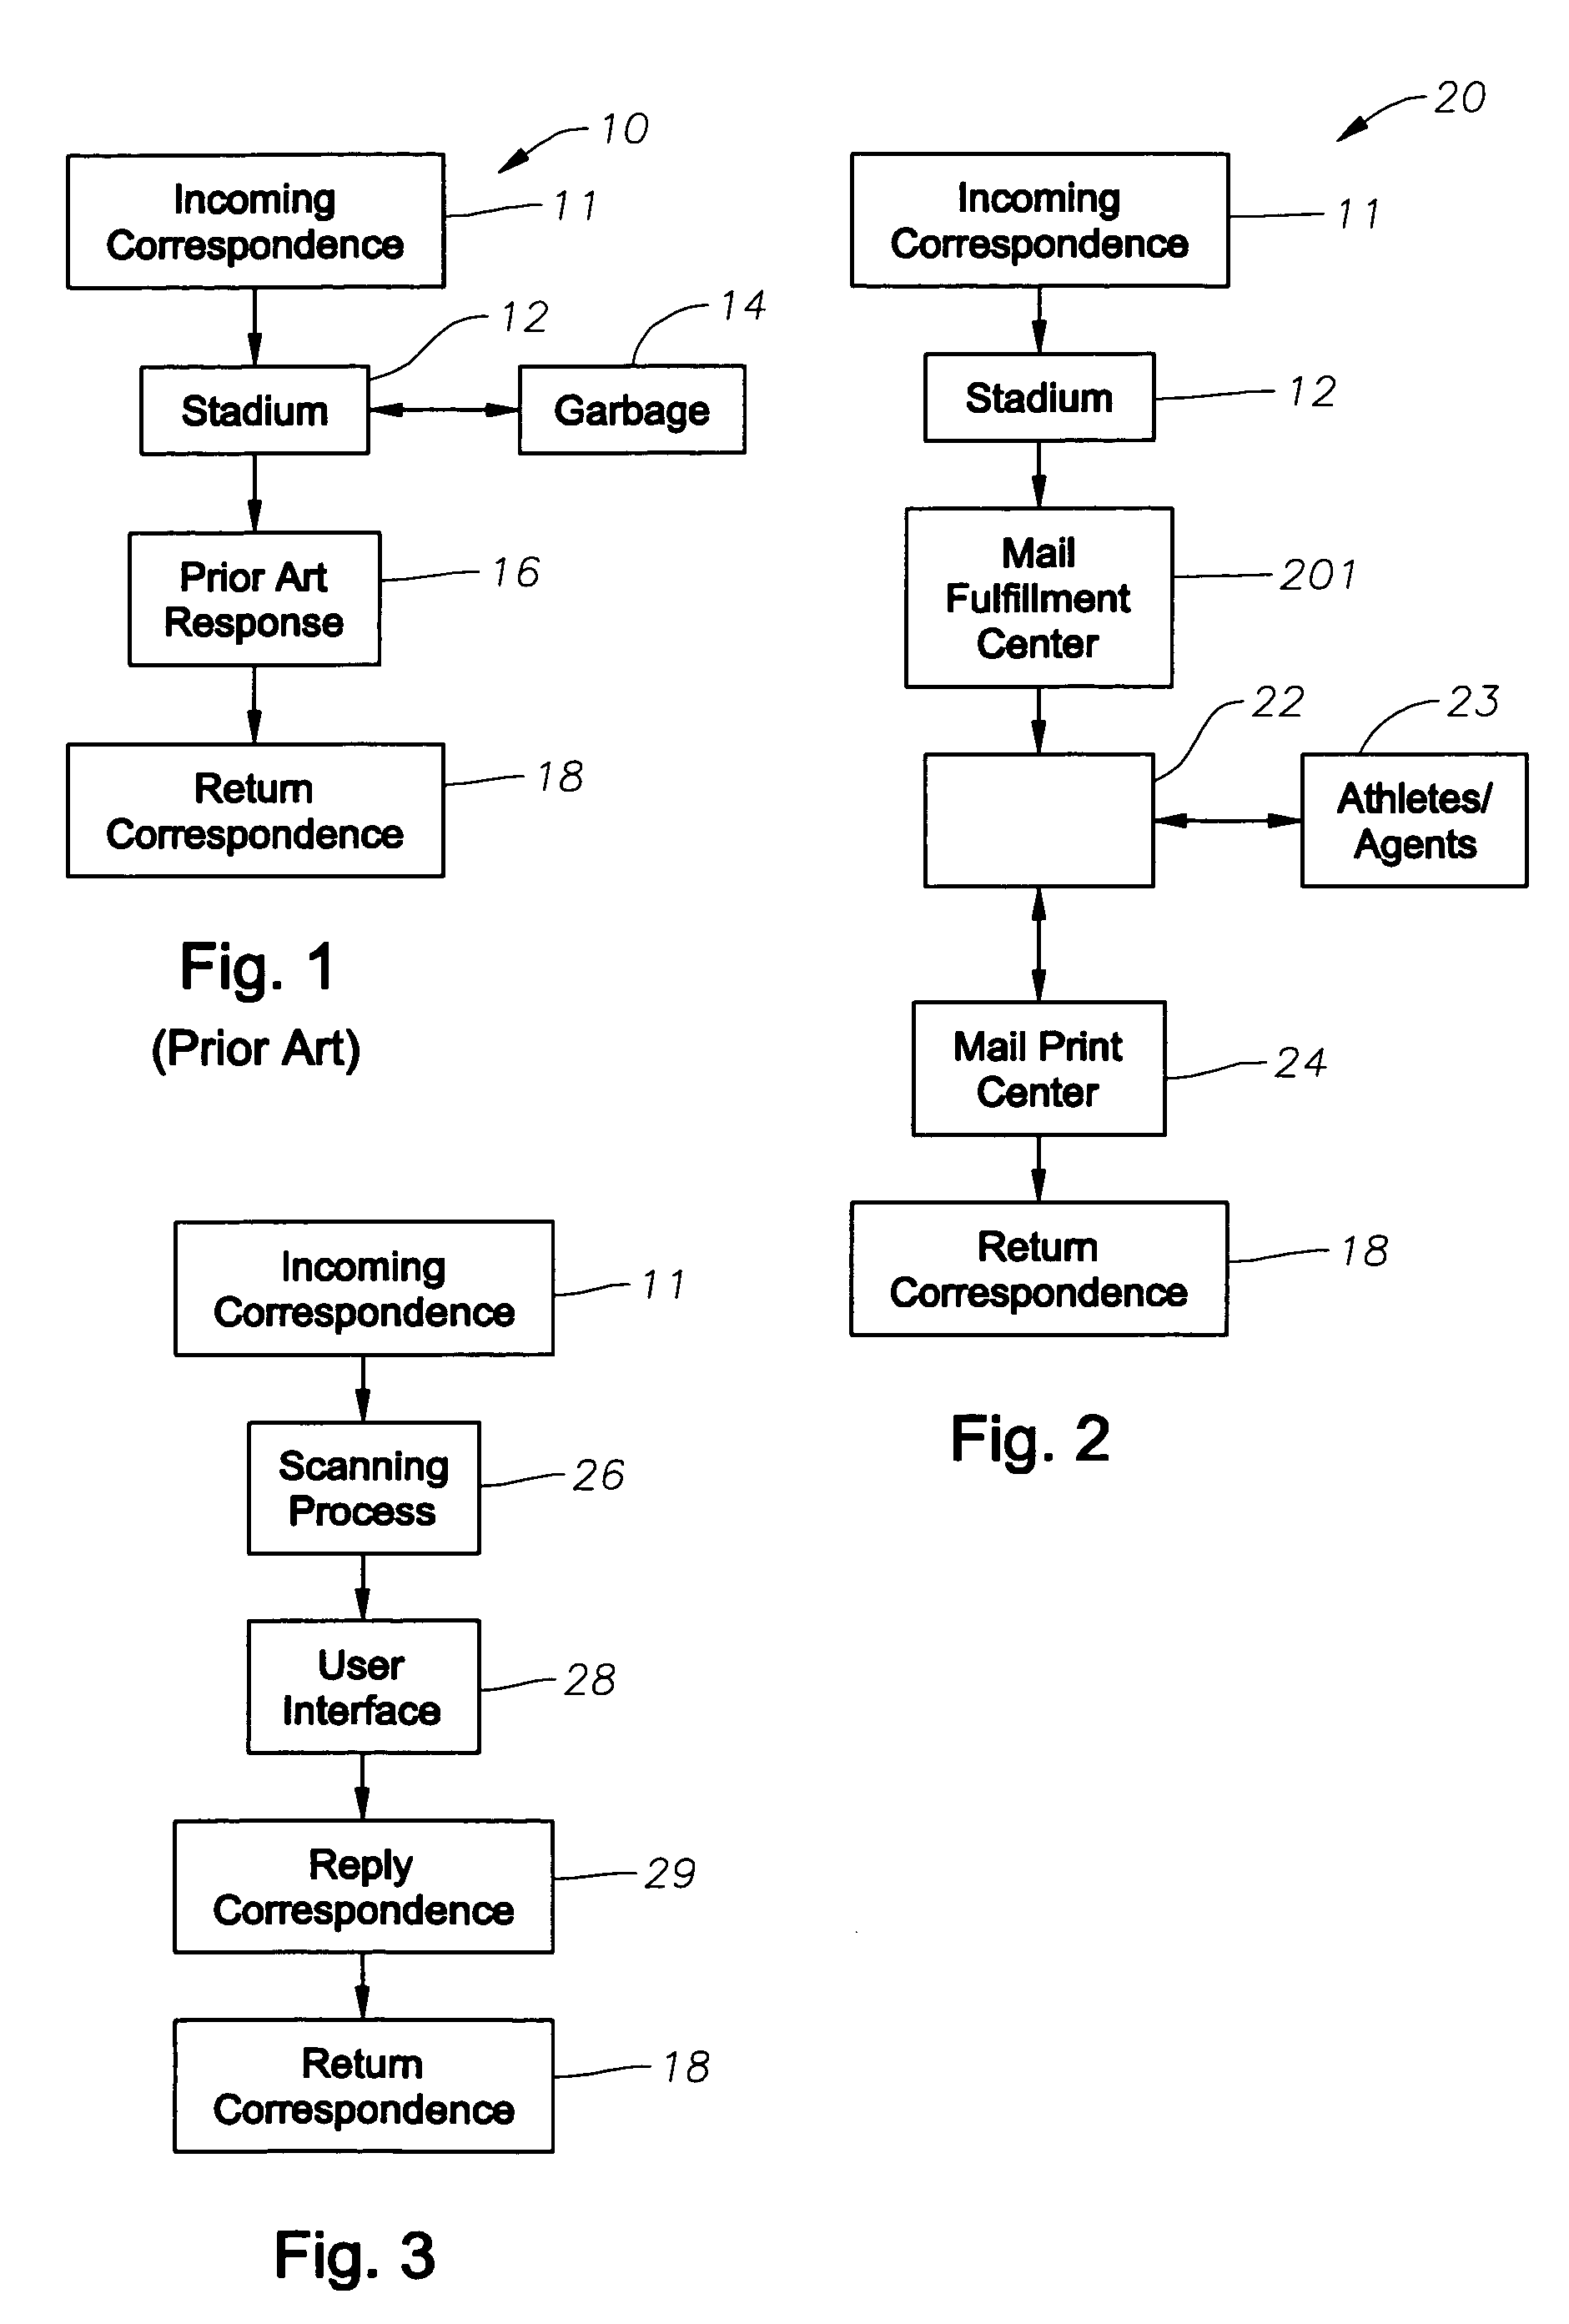 Automated response to solicited and unsolicited communications and automated collection and management of data extracted therefrom